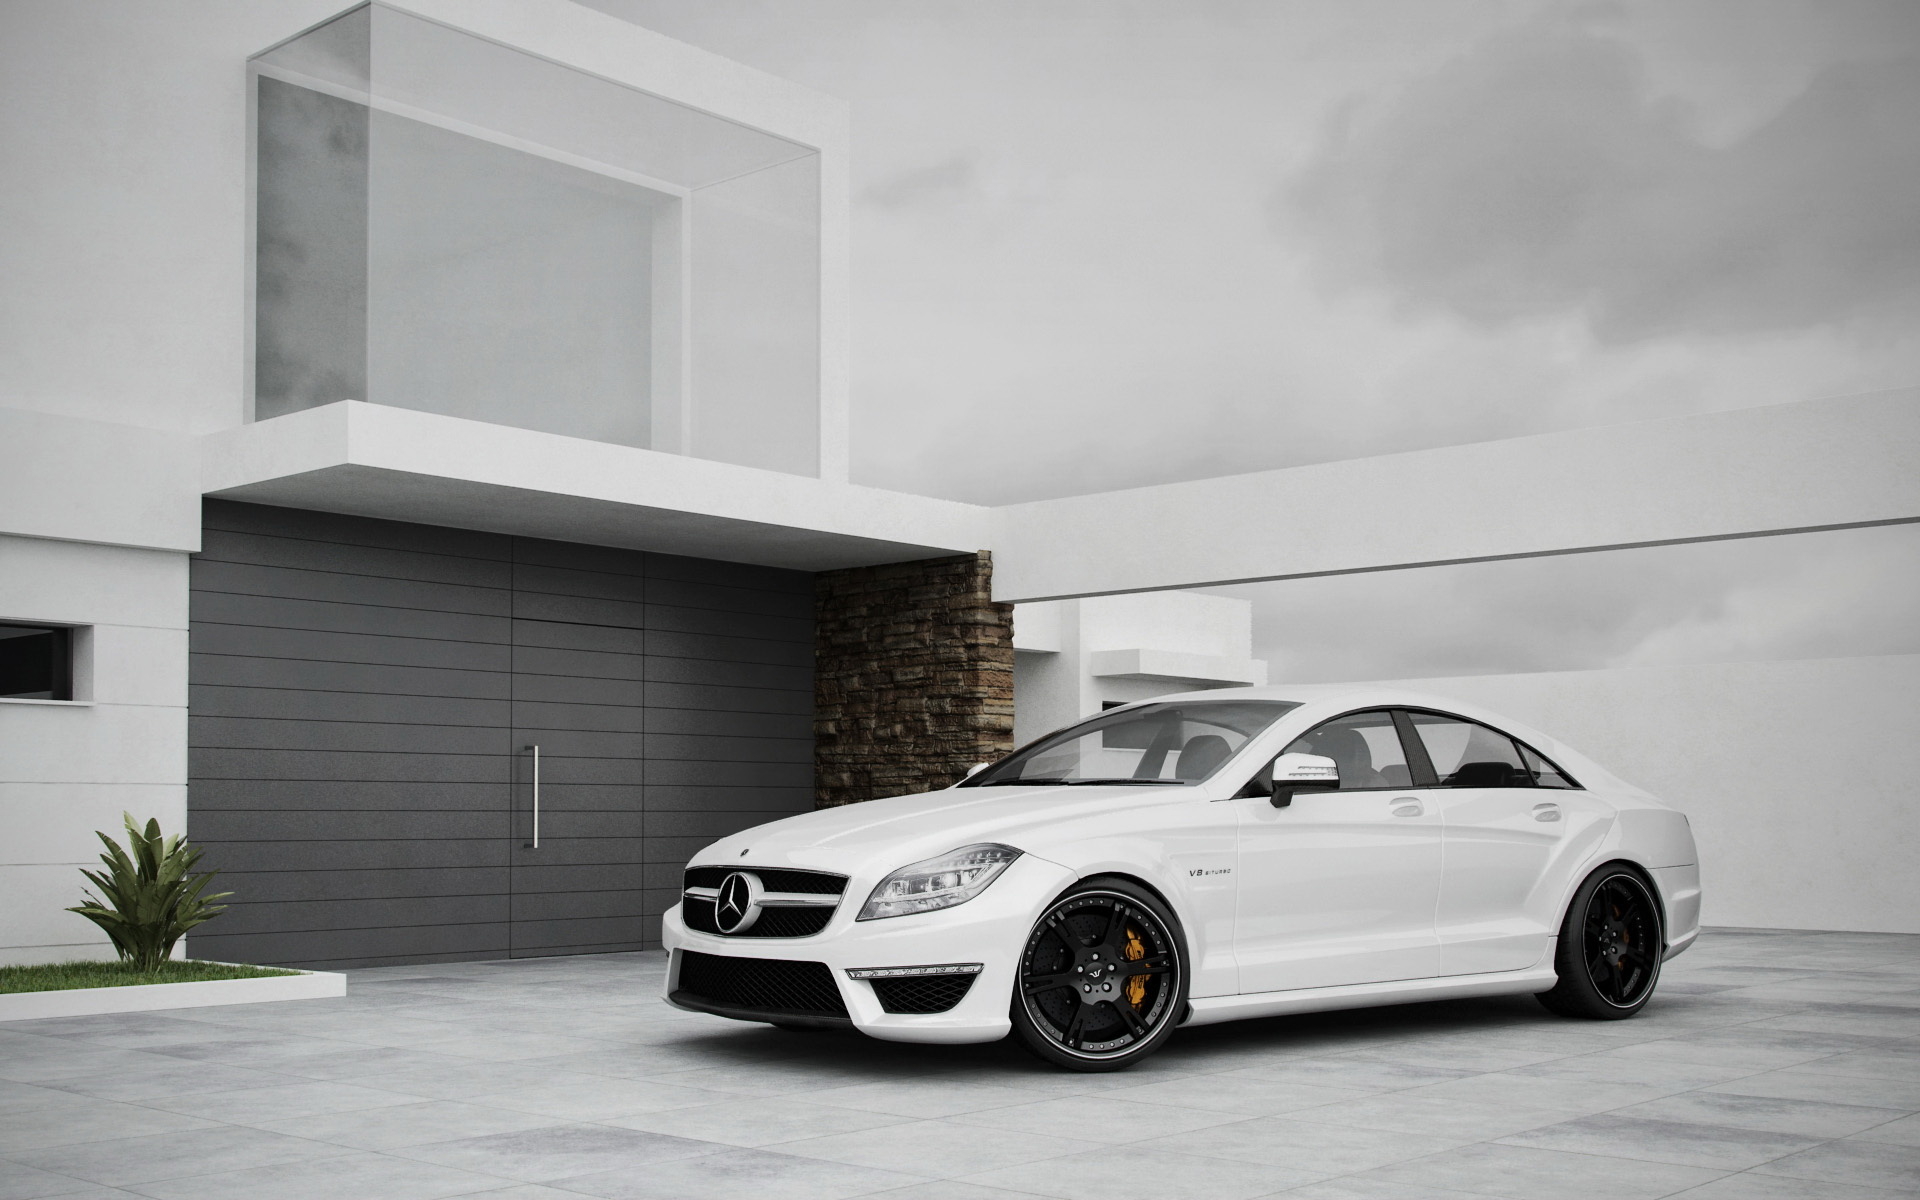 Mercedes Benz Cls 63 Amg Wallpapers And Images - Mercedes Benz Cls 63 Amg 2017 - HD Wallpaper 